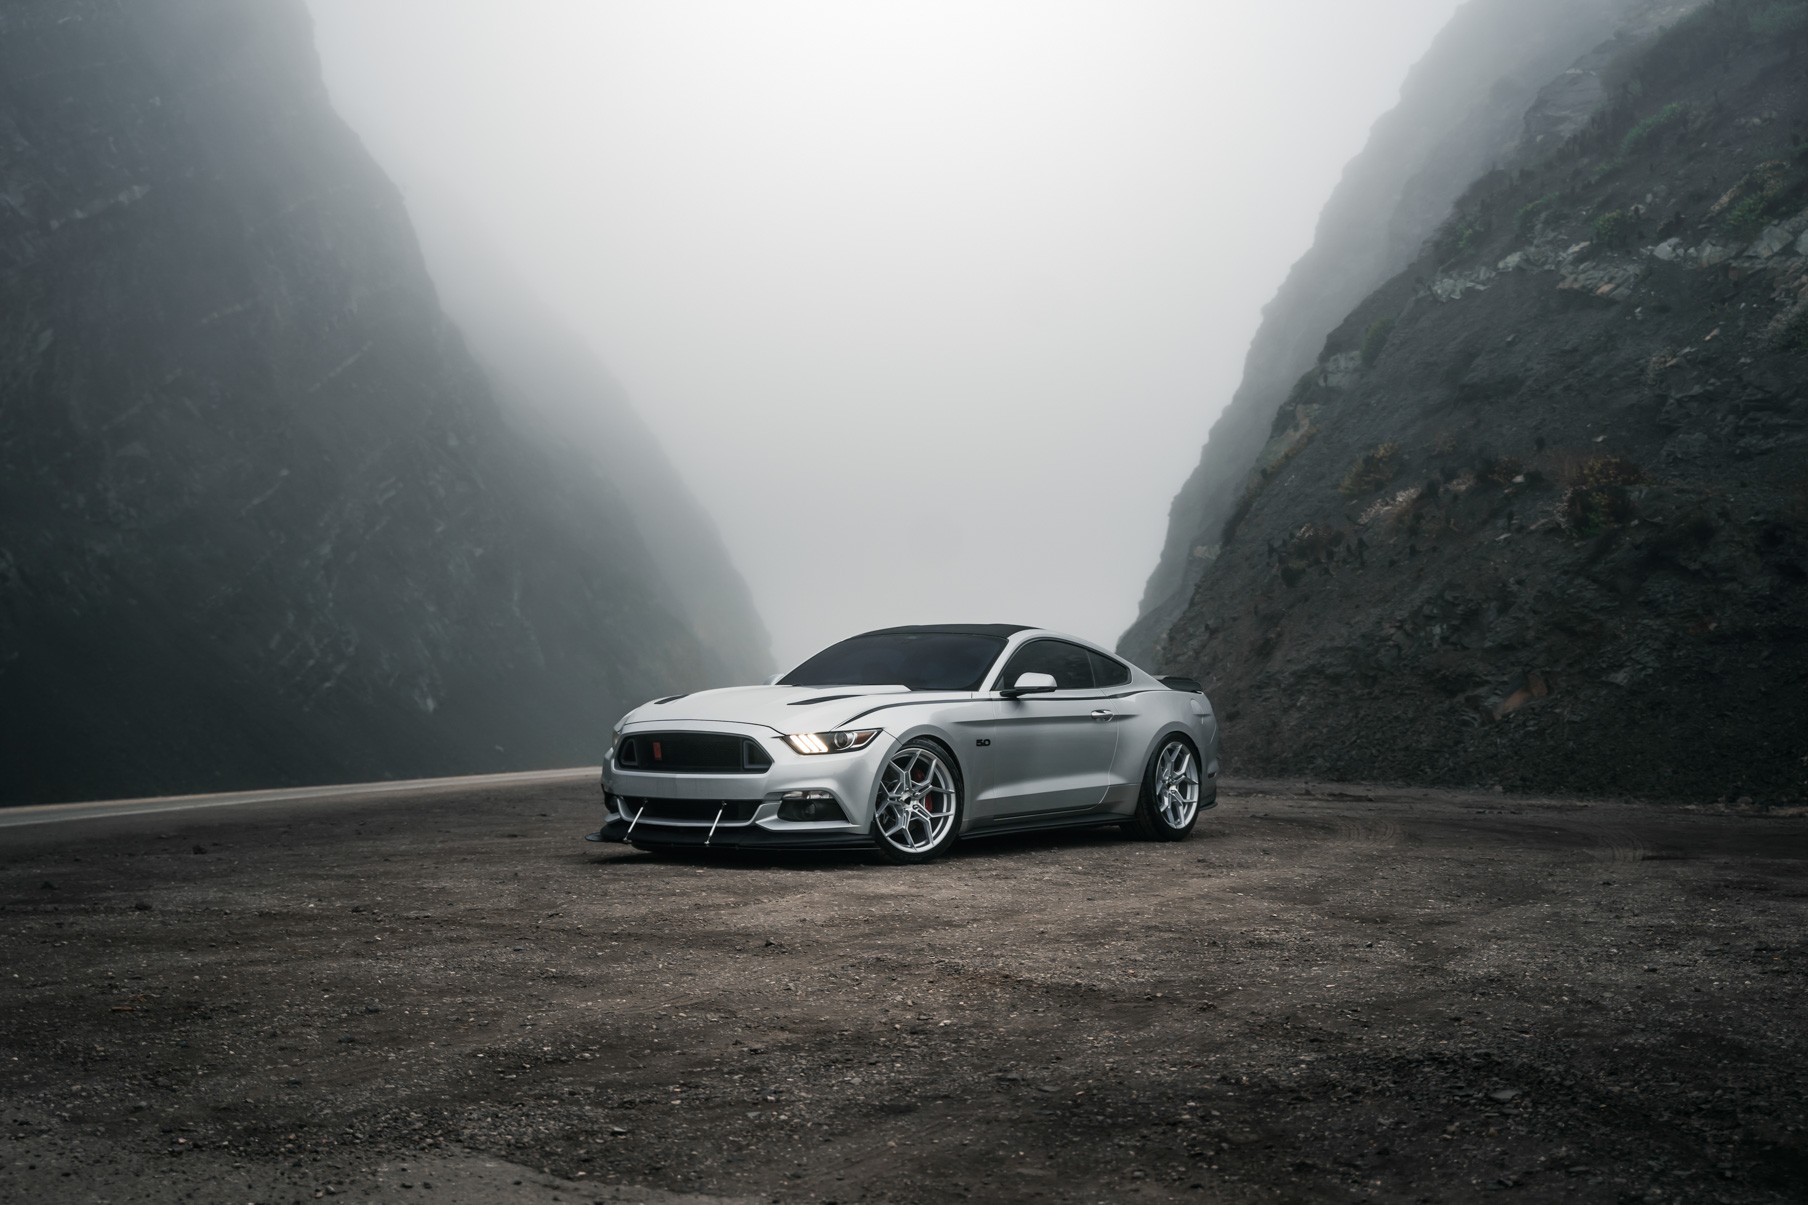 S650 Mustang Blaque Diamond BD-F18 BD-D25 BD-F29 Flow Forged Series - Vibe Motorsports 2016_Mustang_GT_Blaque_Diamond_wheels_BDF25_20_inch_Brushed_Silver-1